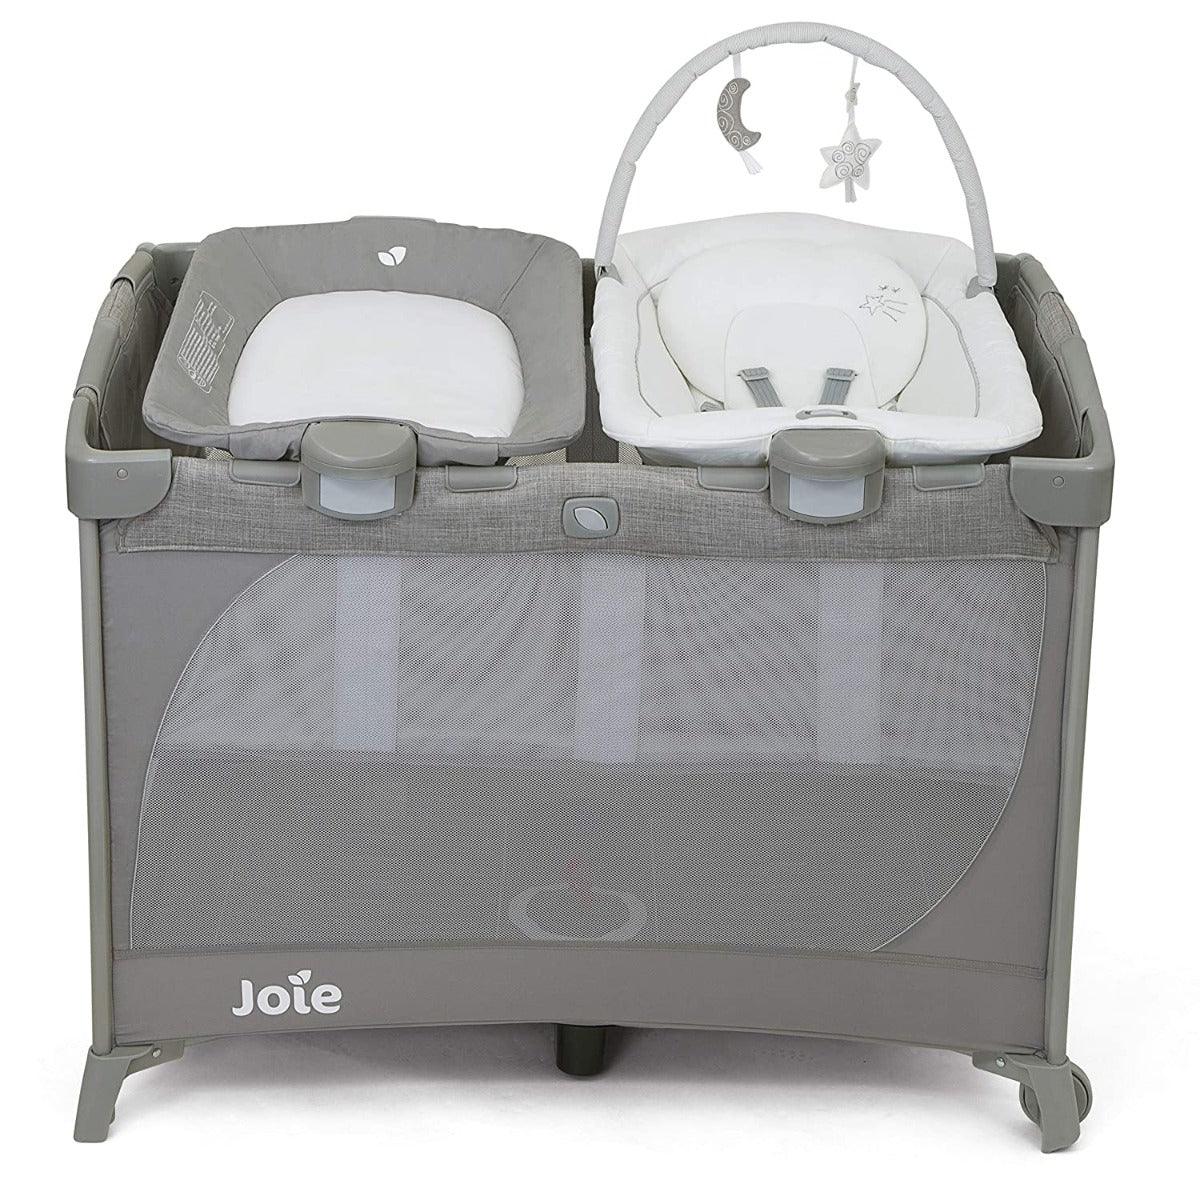 Joie Commuter Change & Bounce Baby Cot Starry Night - Playard For Ages 0-3 Years